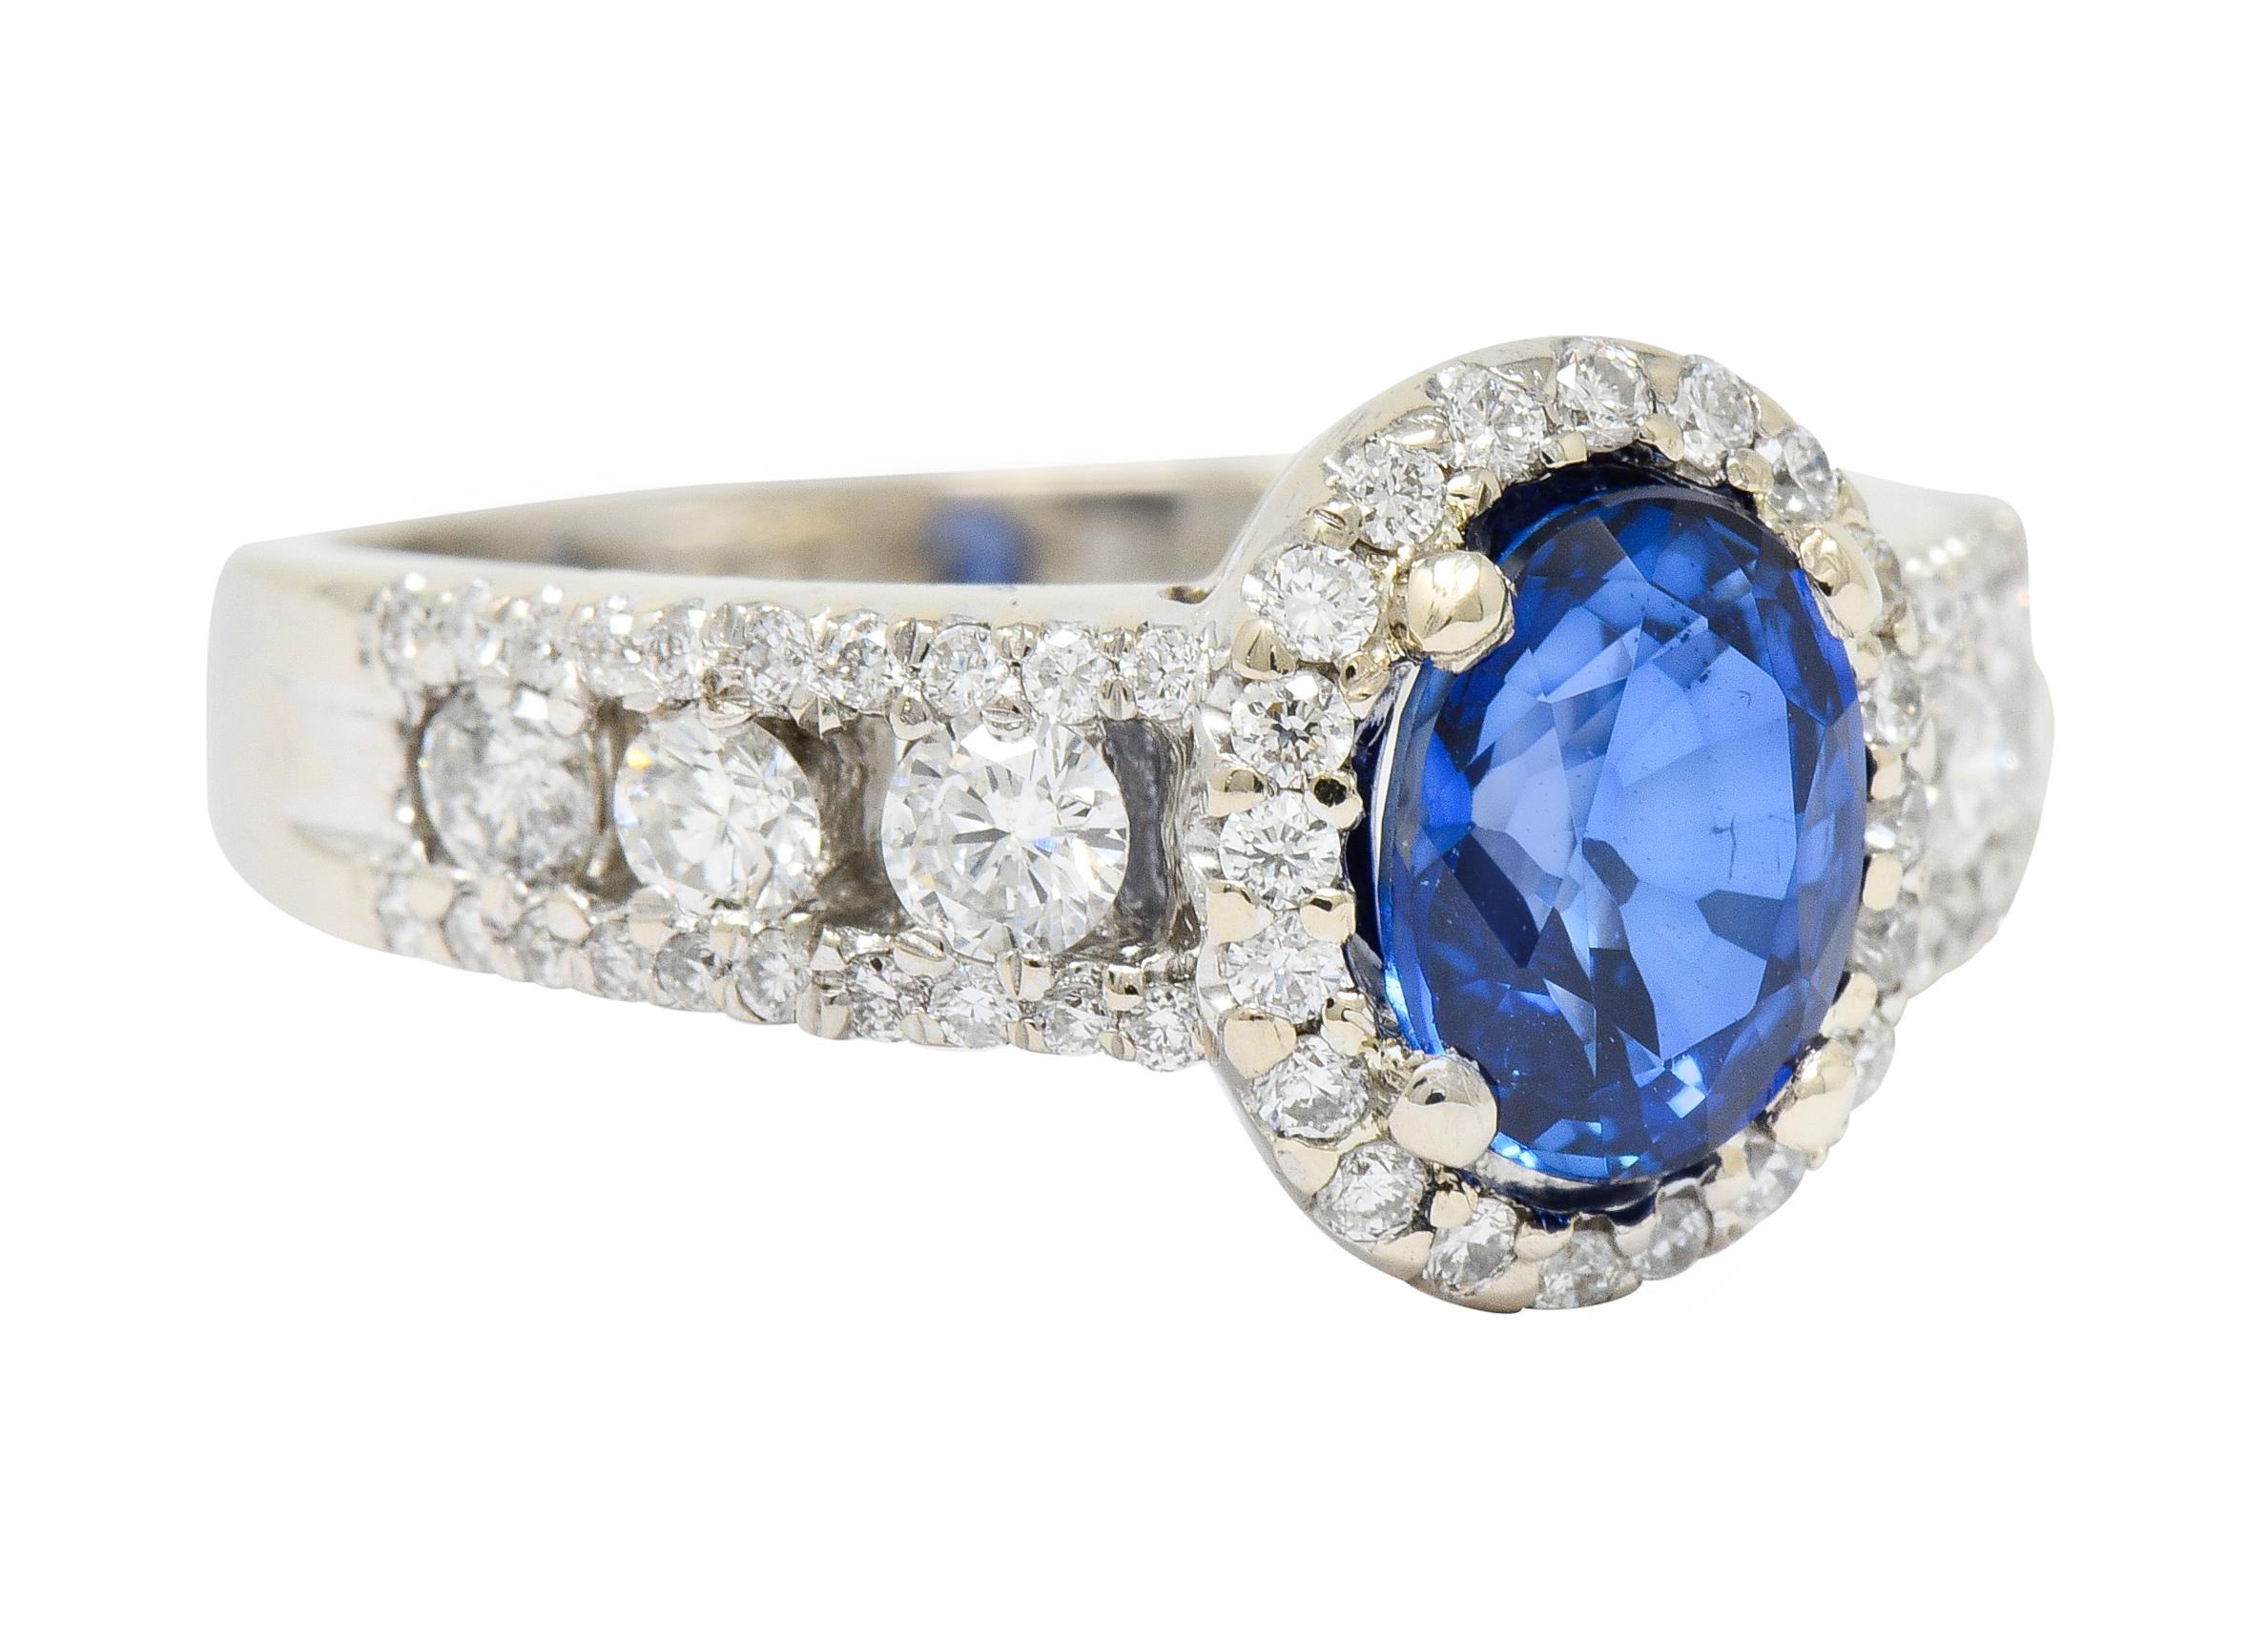 Centering an oval cut sapphire weighing approximately 1.36 carats, transparent and deeply royal blue in color

With a halo of round brilliant cut diamonds weighing approximately 0.30 carat, G to I color with SI clarity

Flanked by split shoulders